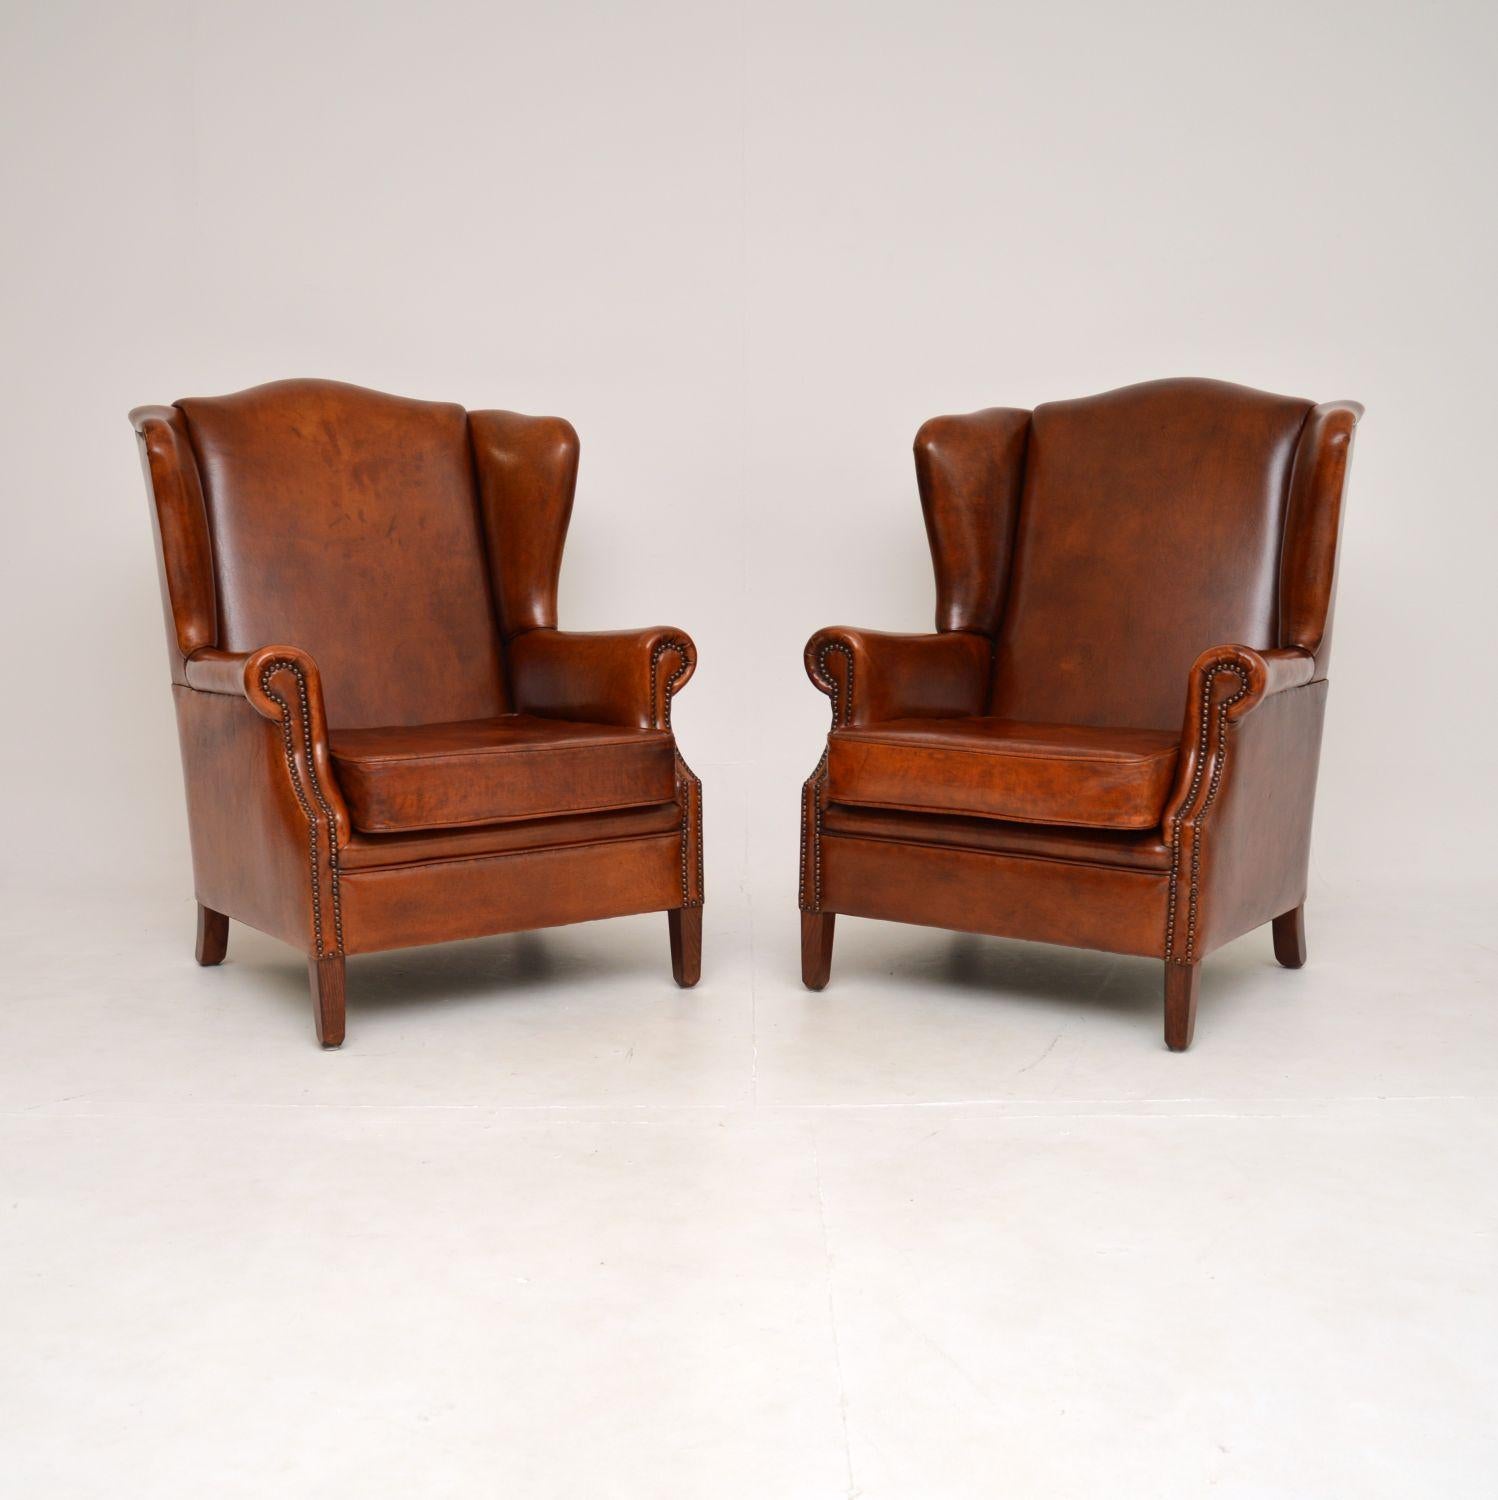 A beautiful and extremely comfortable pair of antique leather wing back armchairs. They were made in France, they date from around the 1950’s.

The quality is superb, they are very generous in proportion and supportive. The brown leather has a